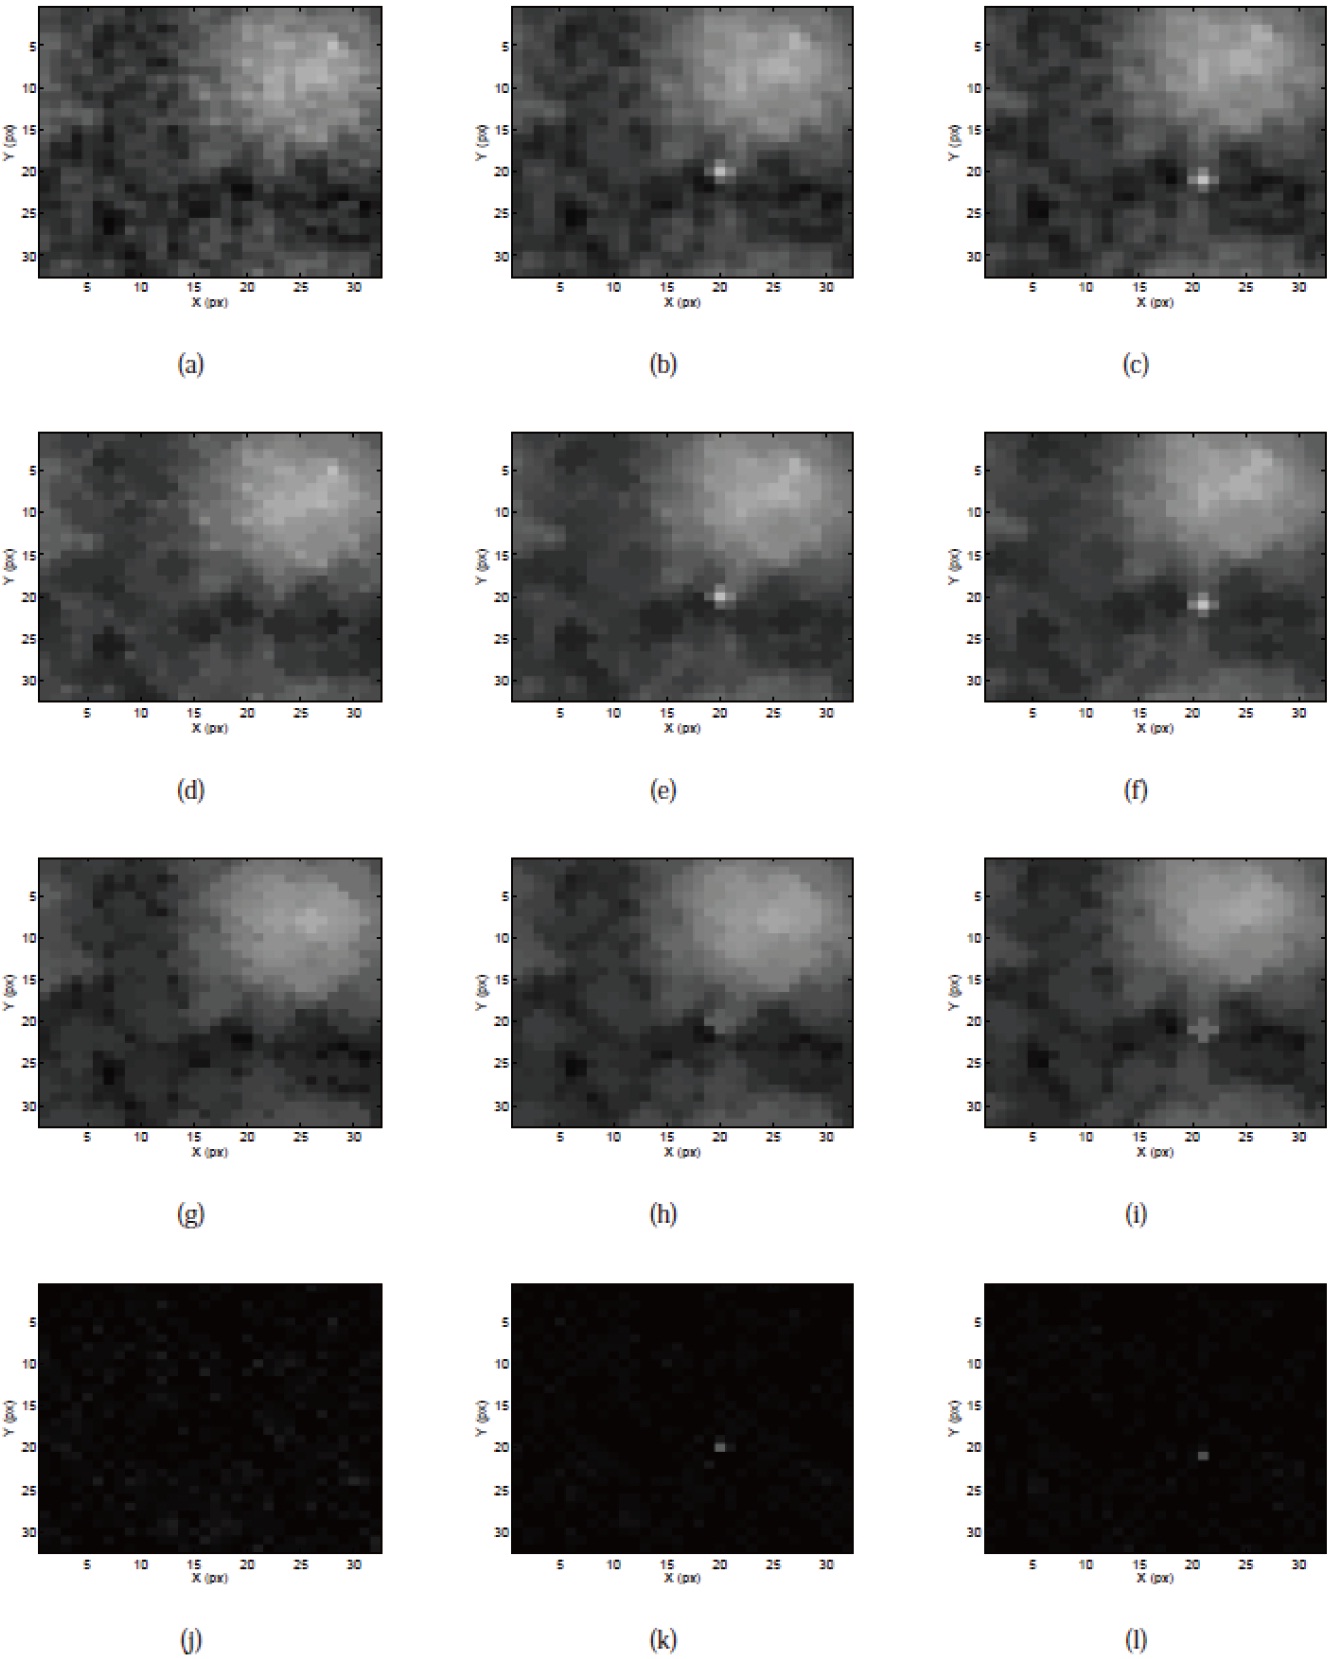 Morphological image processing sequence for artificial image data (20th, 40th, and 60th frames for each column). (a)-(c) Raw input images. (d)-(f ) Close images. (g)-(i) Open images. (j)-(l) Close-minus-open images. A combination of the two operations extracts the peak regions in images.